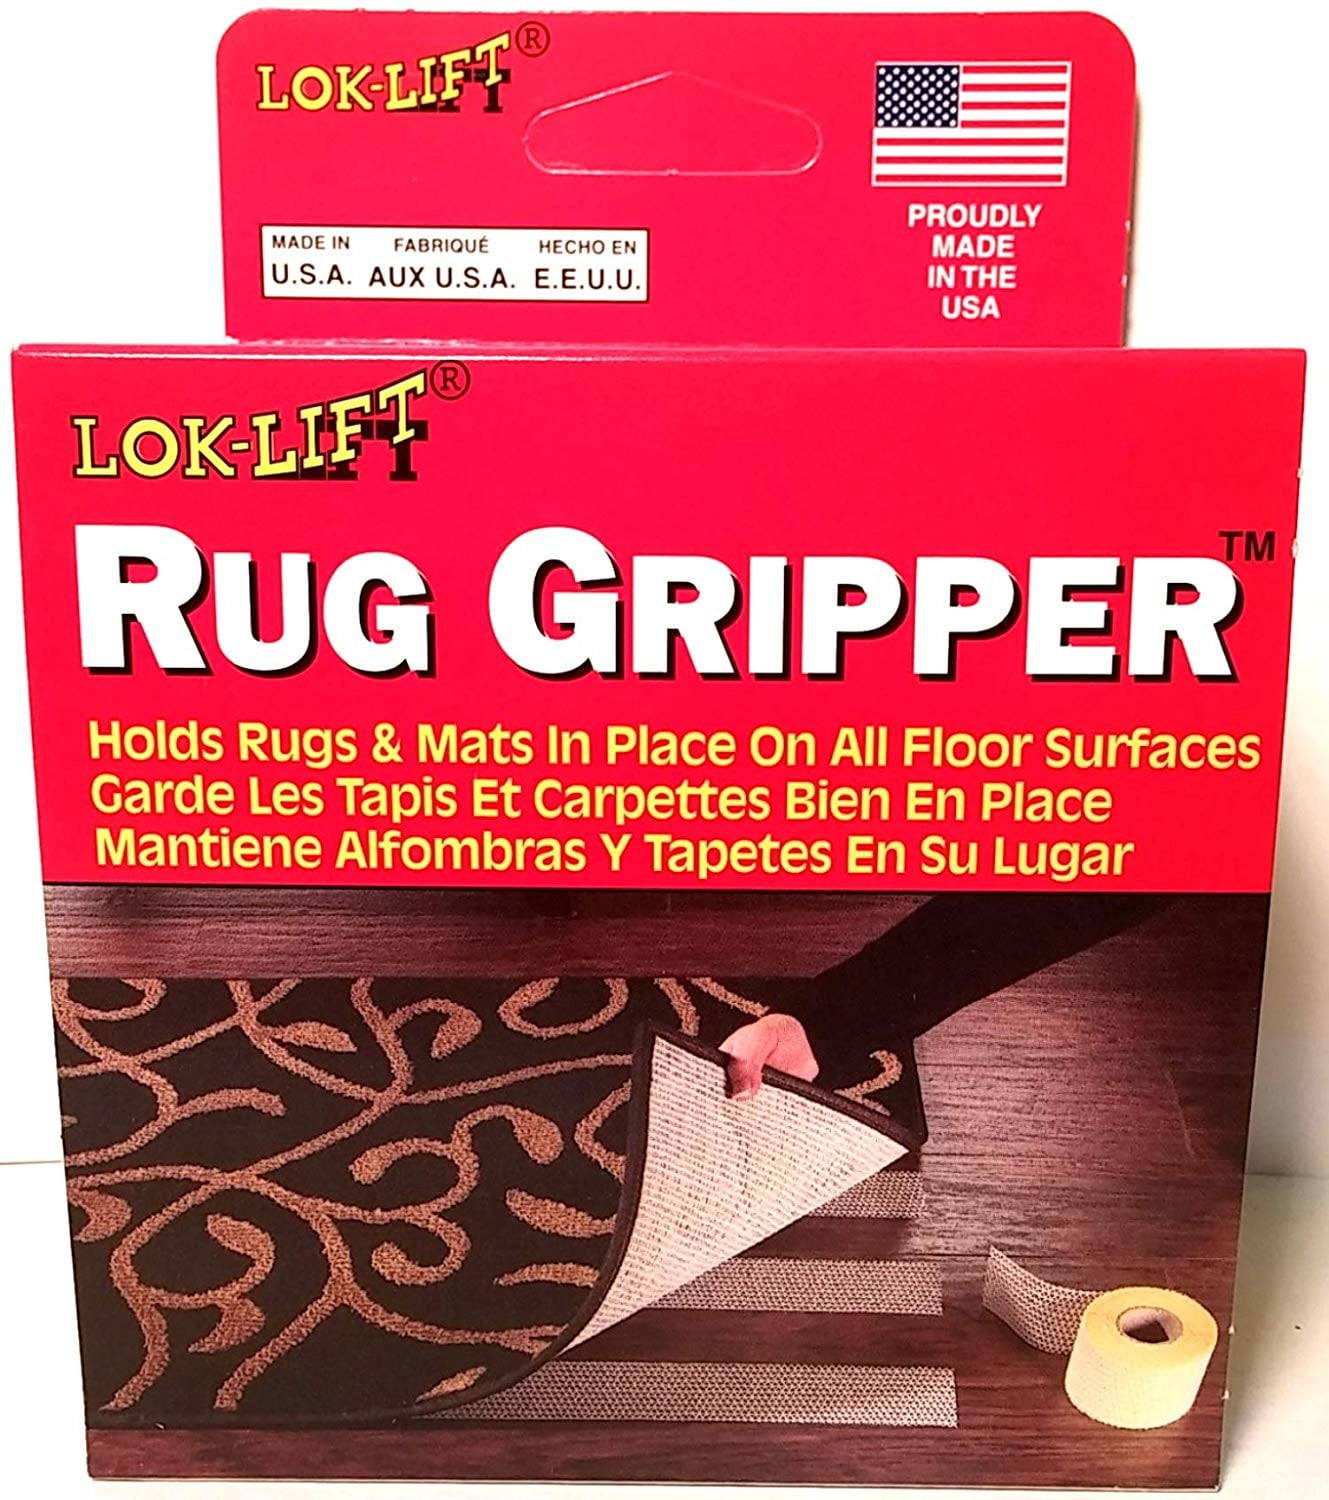 Ruggies Nonslip Rug Gripper Tape (8-Pack) - Power Townsend Company